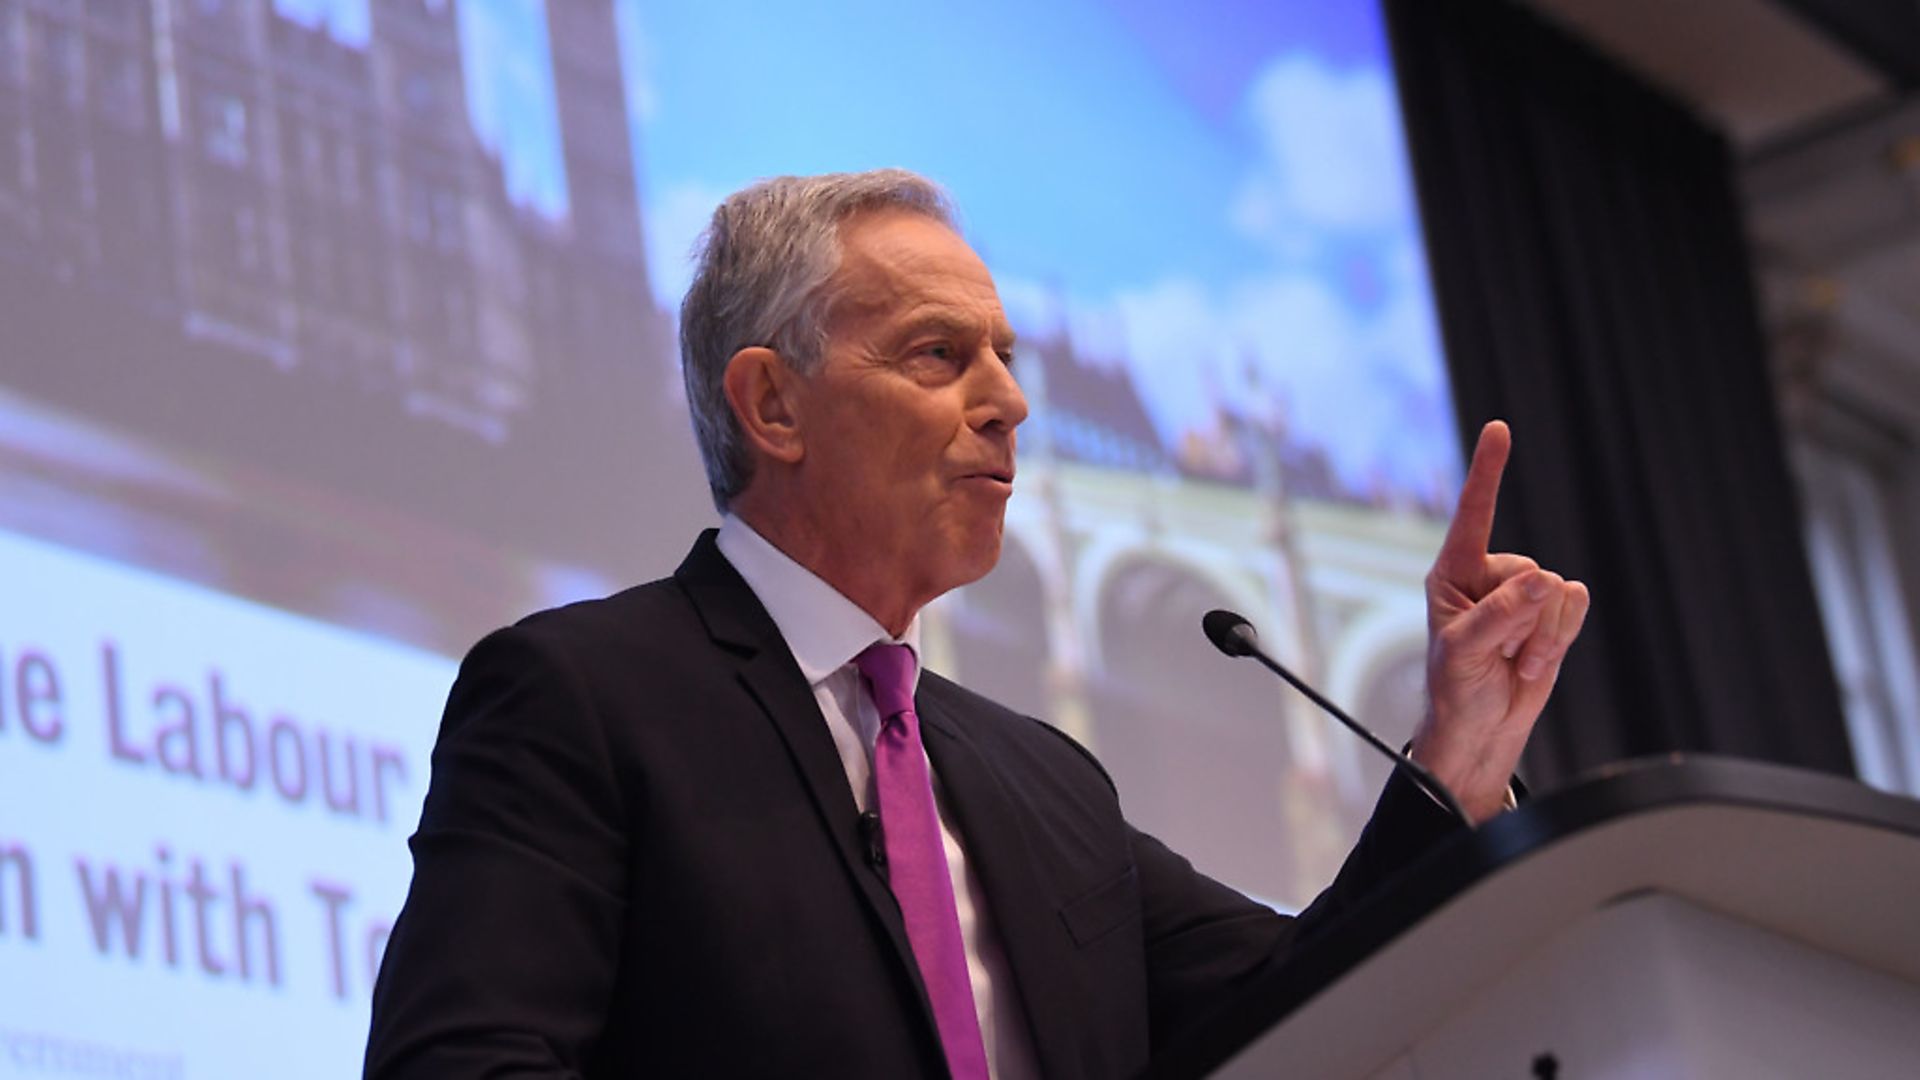 Former prime minister Tony Blair during a speech to mark the 120th anniversary of the founding of the Labour party. Photograph: Stefan Rousseau/PA Wire. - Credit: PA